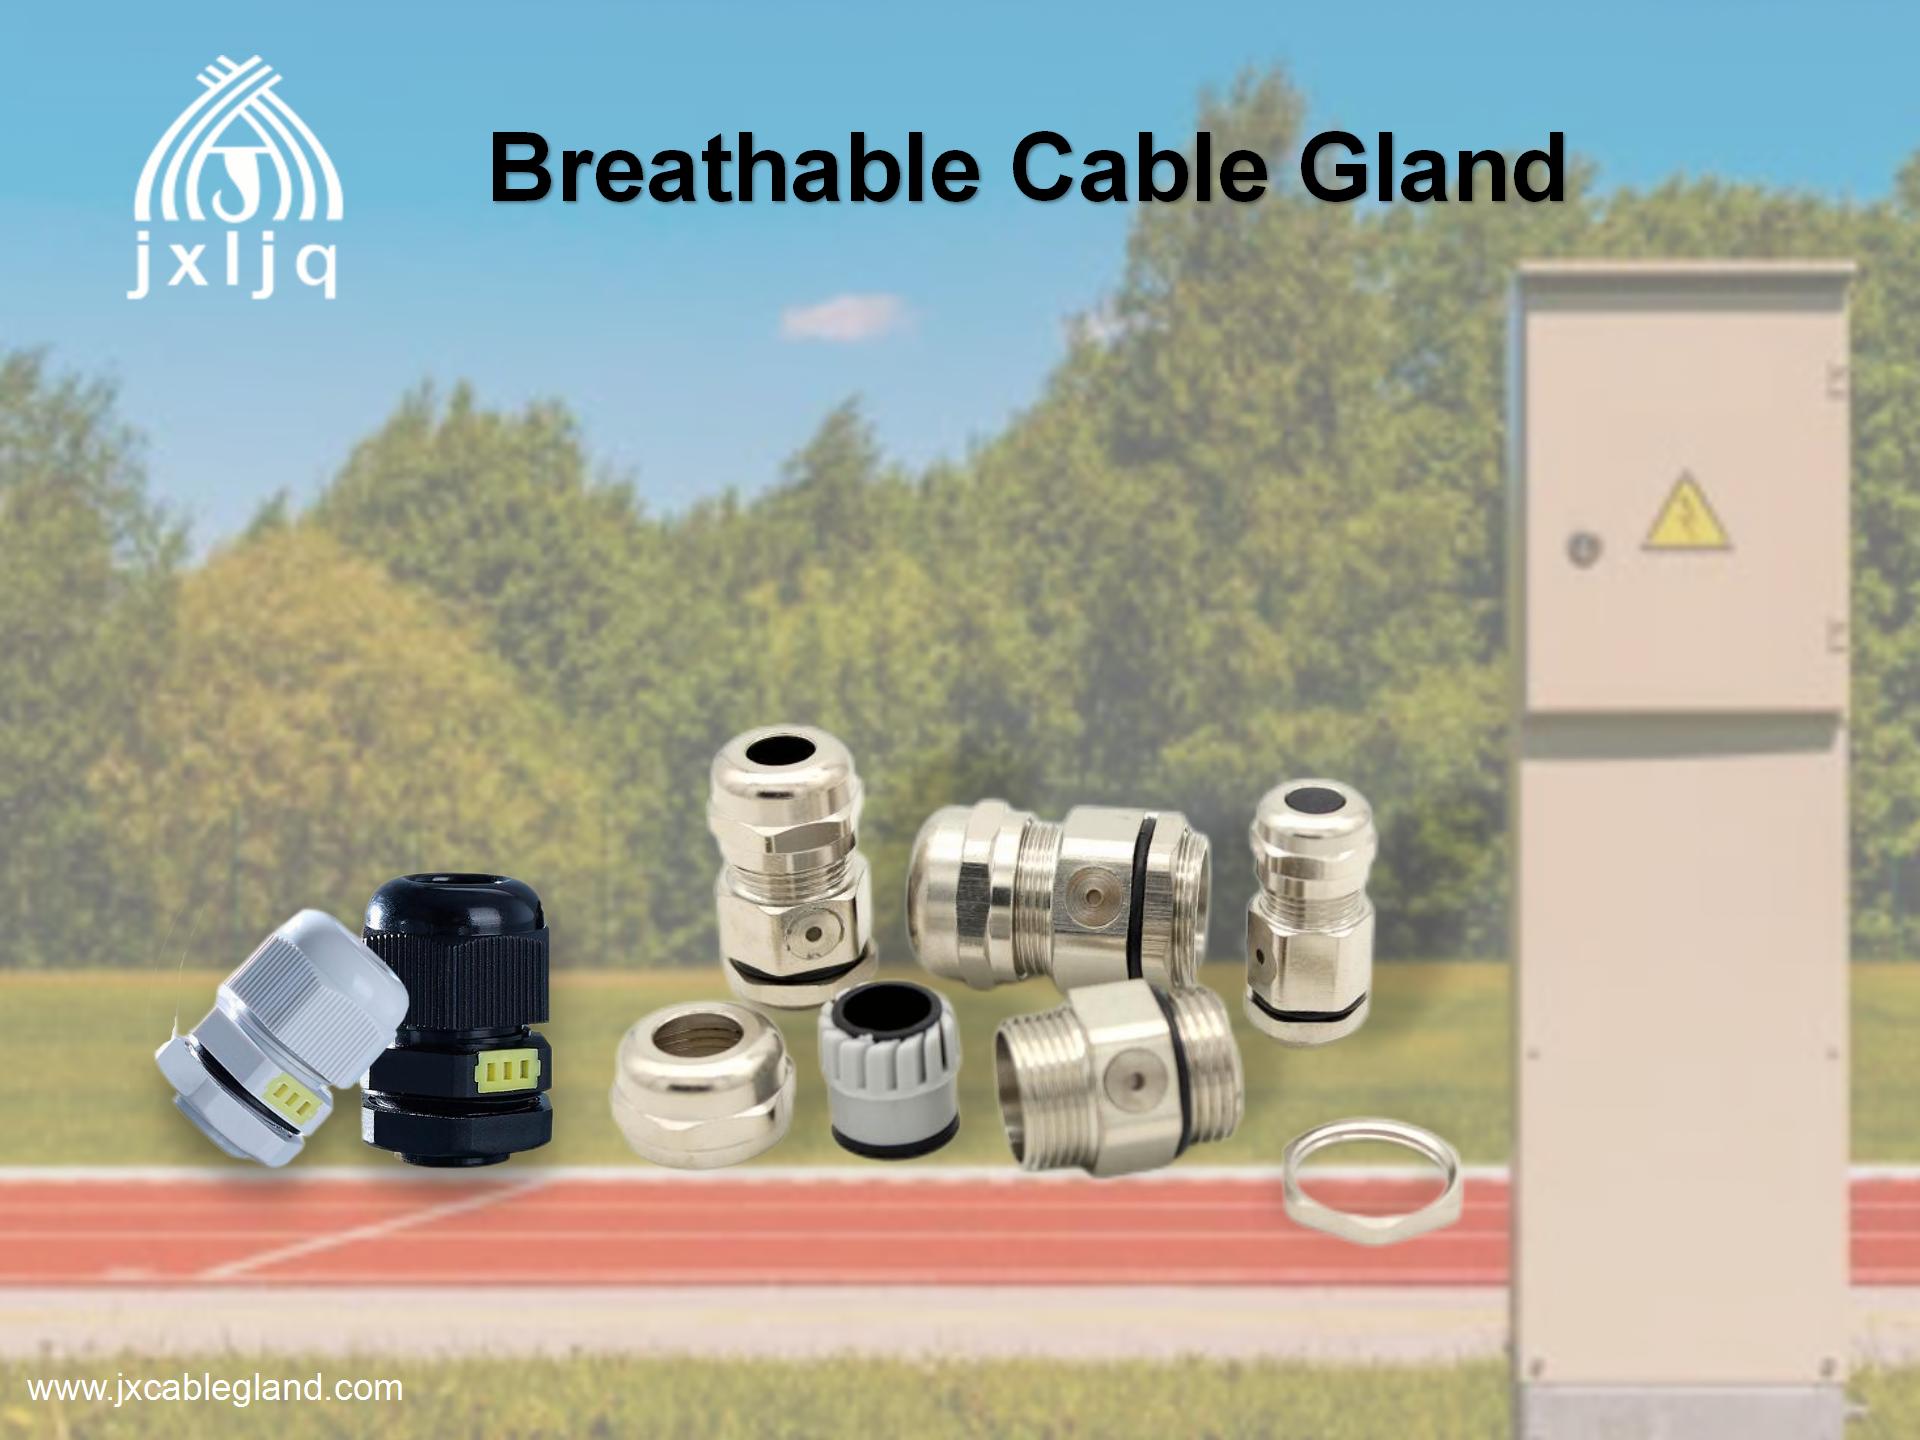 How to find high quality breathable cable gland?